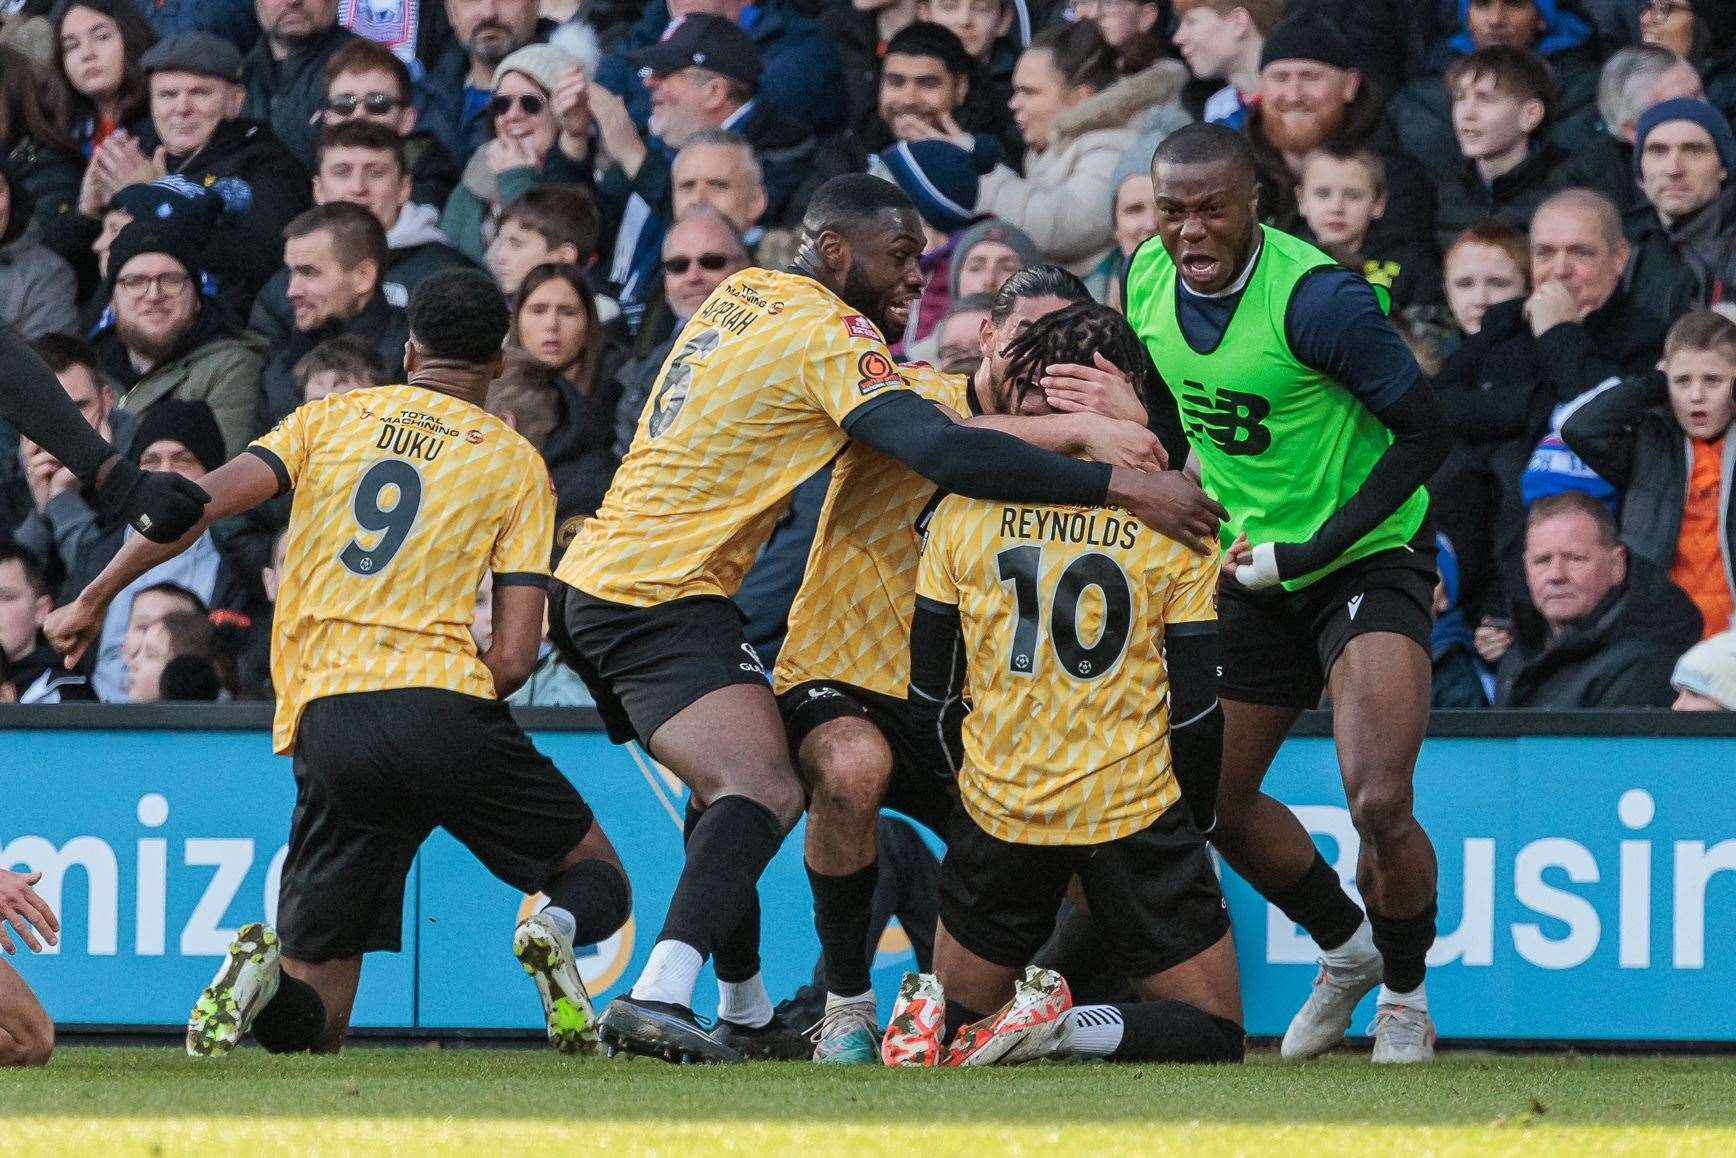 What a moment for Lamar Reynolds after giving Maidstone the lead at Ipswich. Picture: Helen Cooper